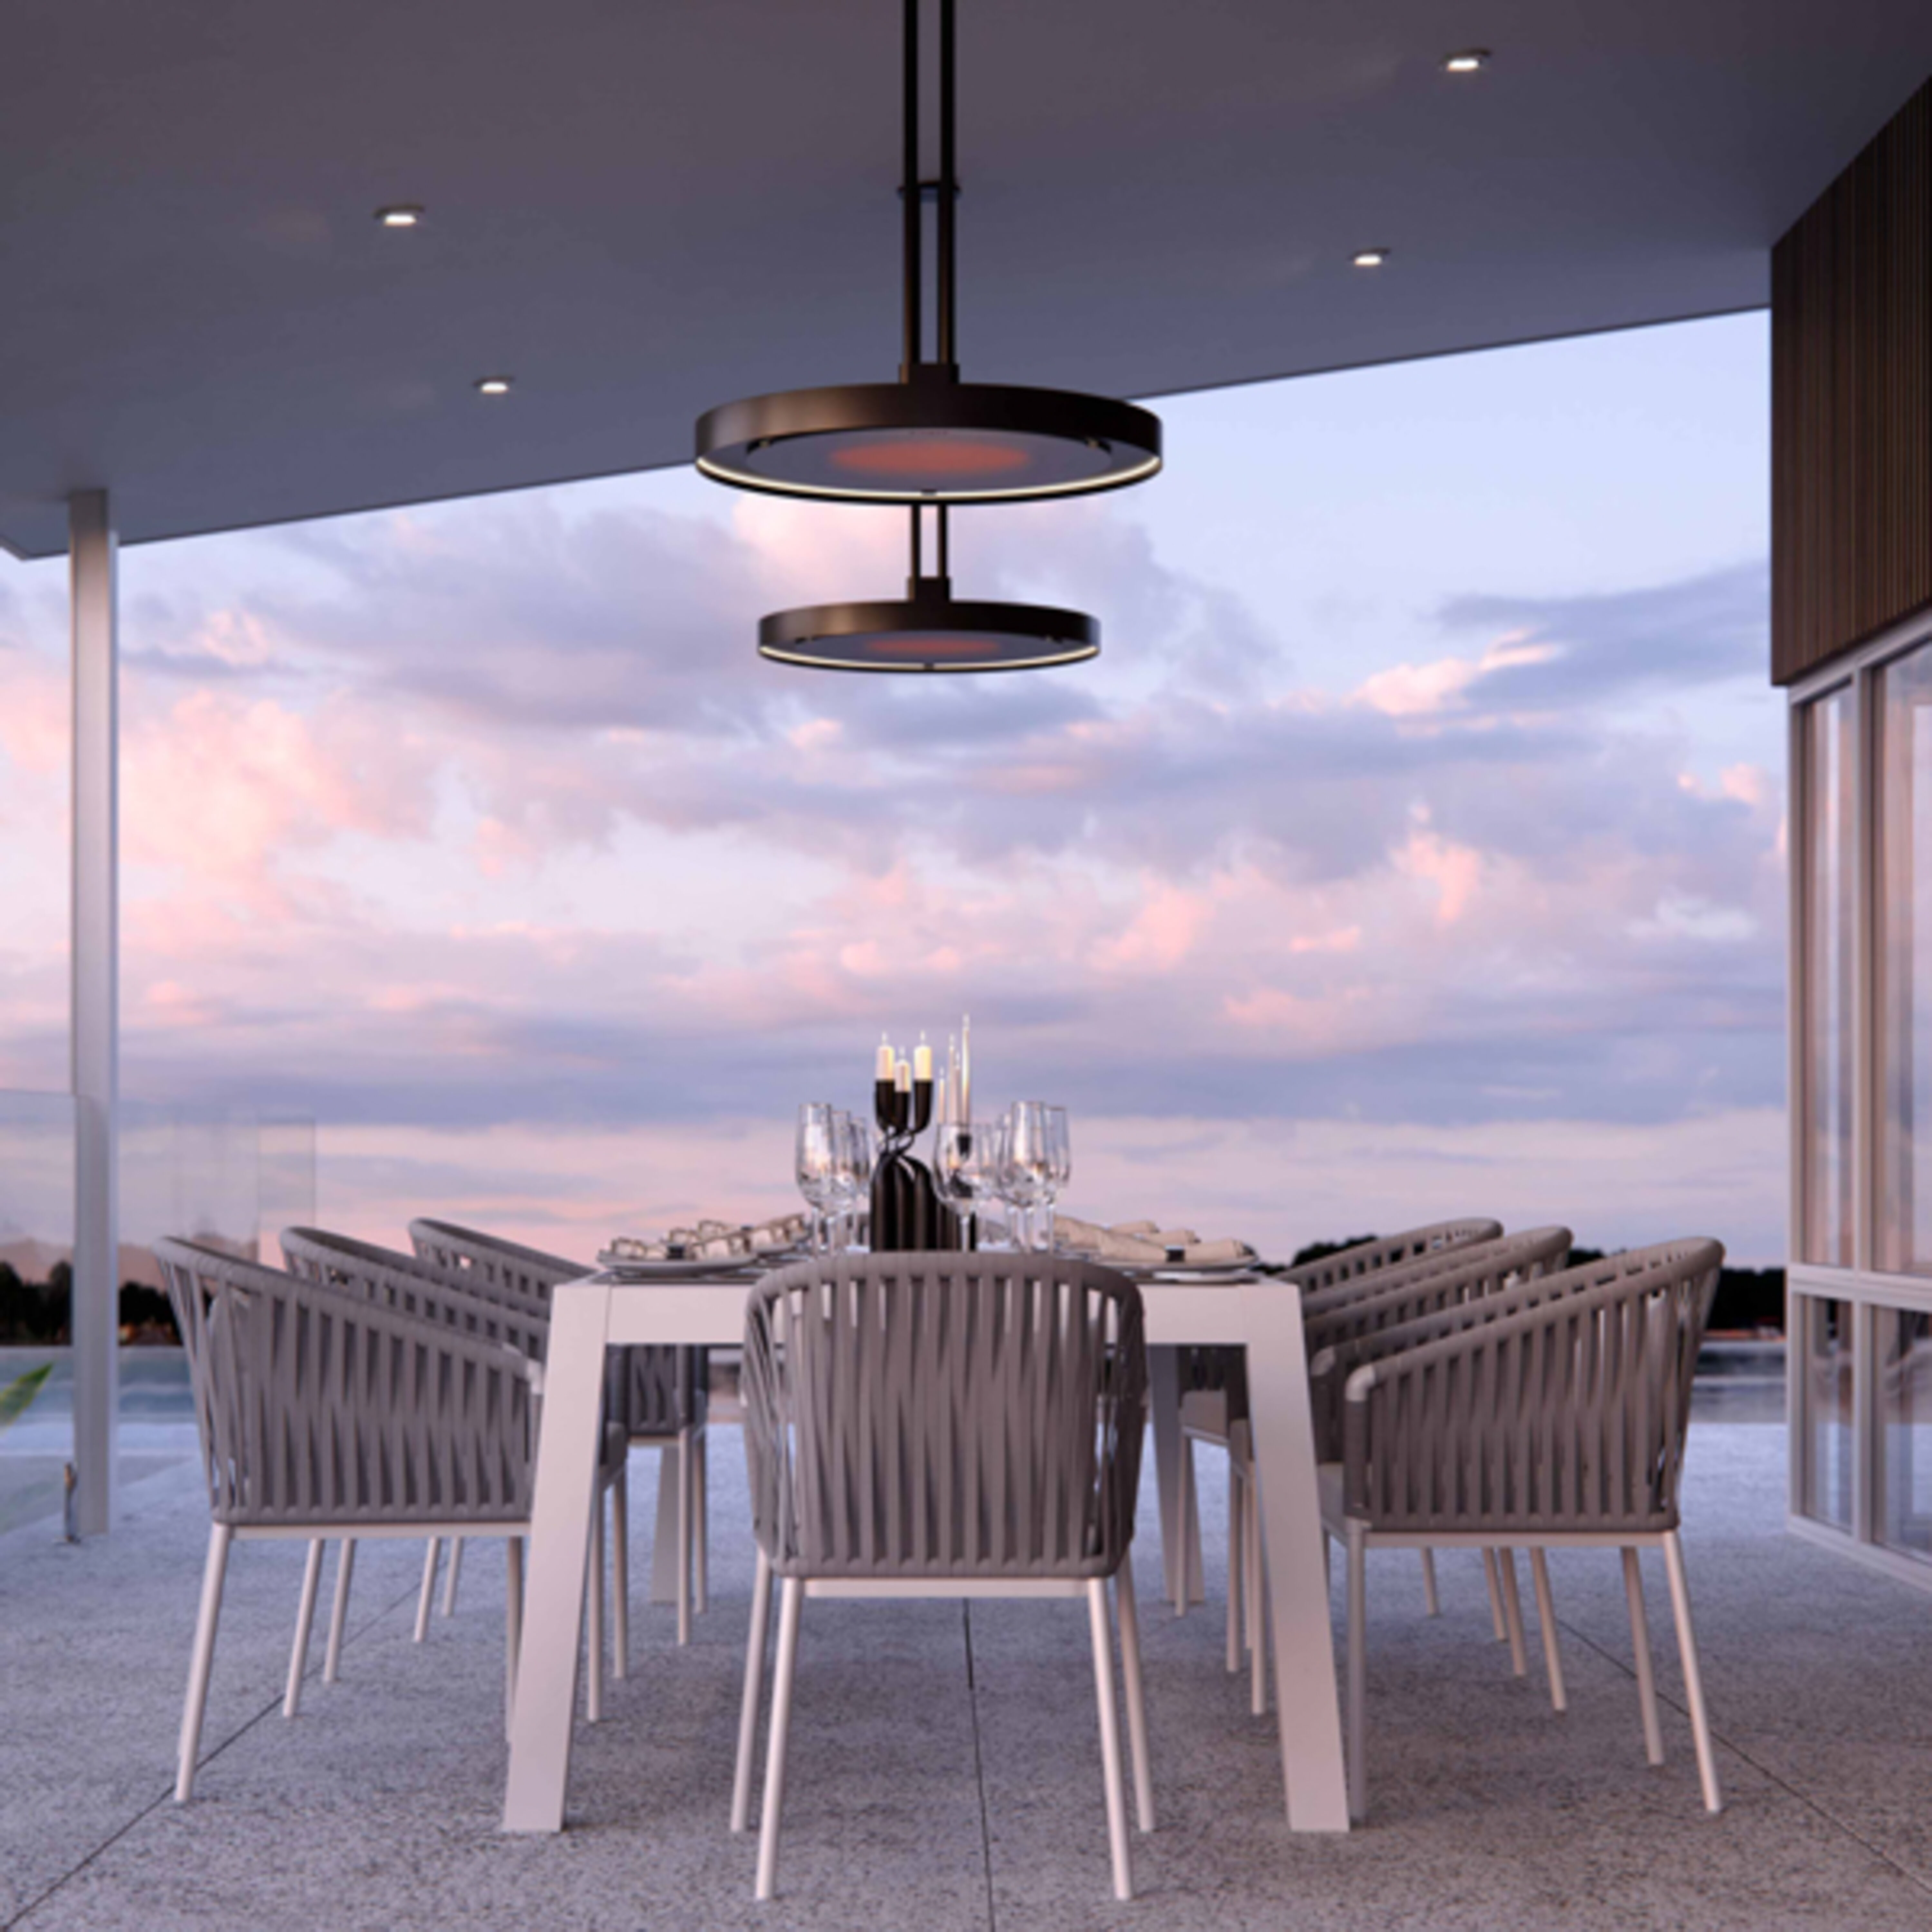 The Bromic Eclipse Smart-Heat Pendant Electric Patio Heater installed in an enclosed patio space underneath a large white dining table with eight chairs.